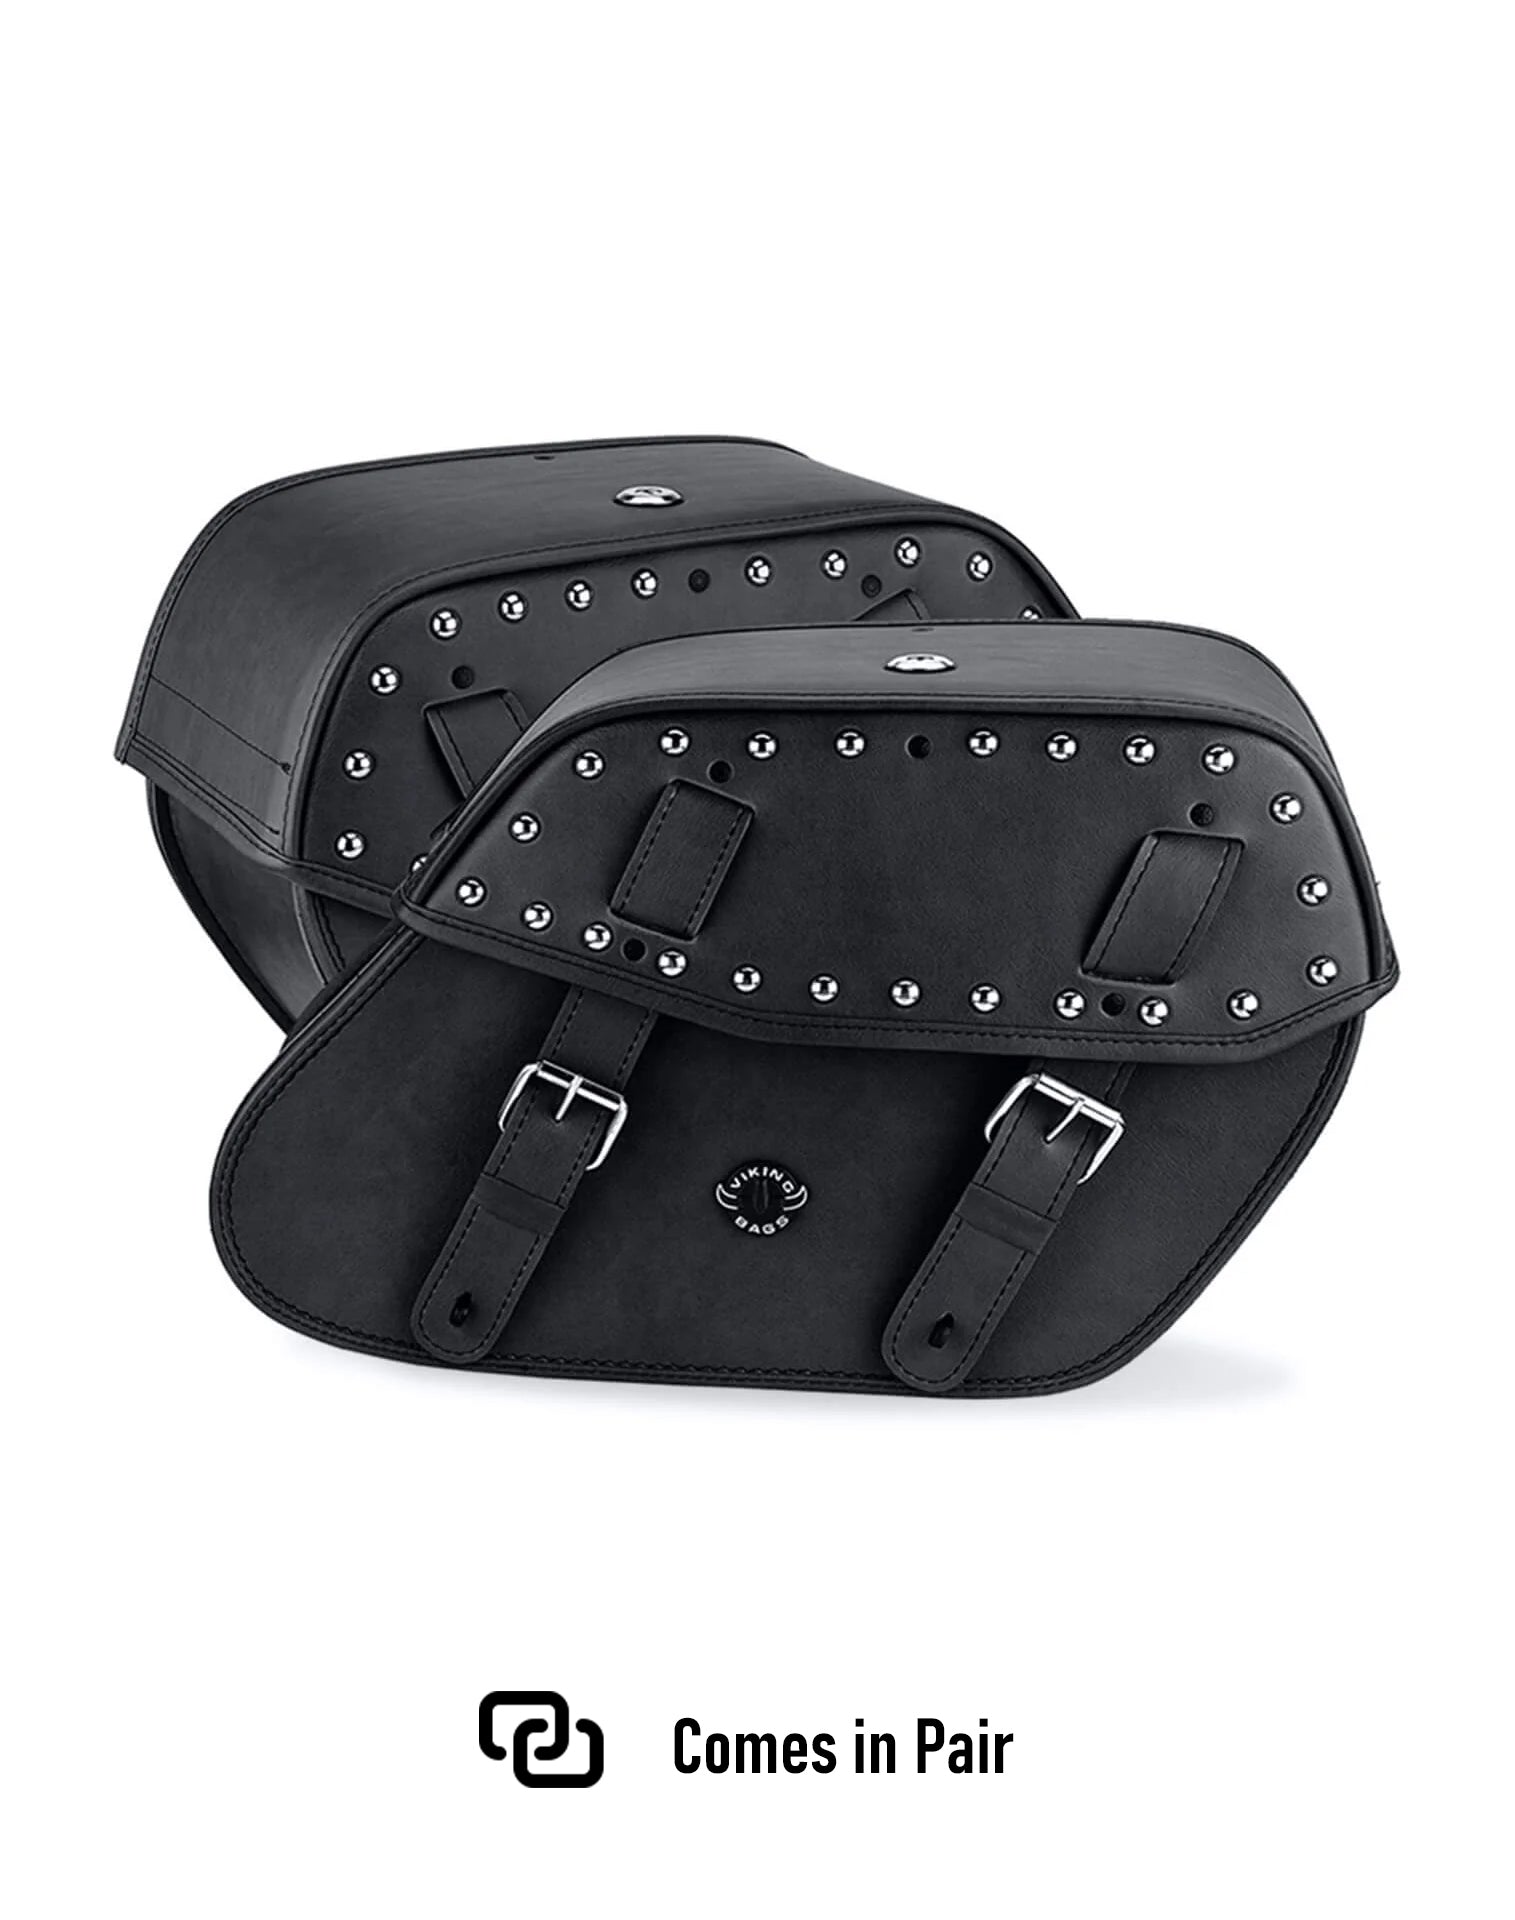 Viking Odin Large Studded Leather Motorcycle Saddlebags For Harley Softail Deluxe Flstn I Weather Resistant Bags Comes in Pair